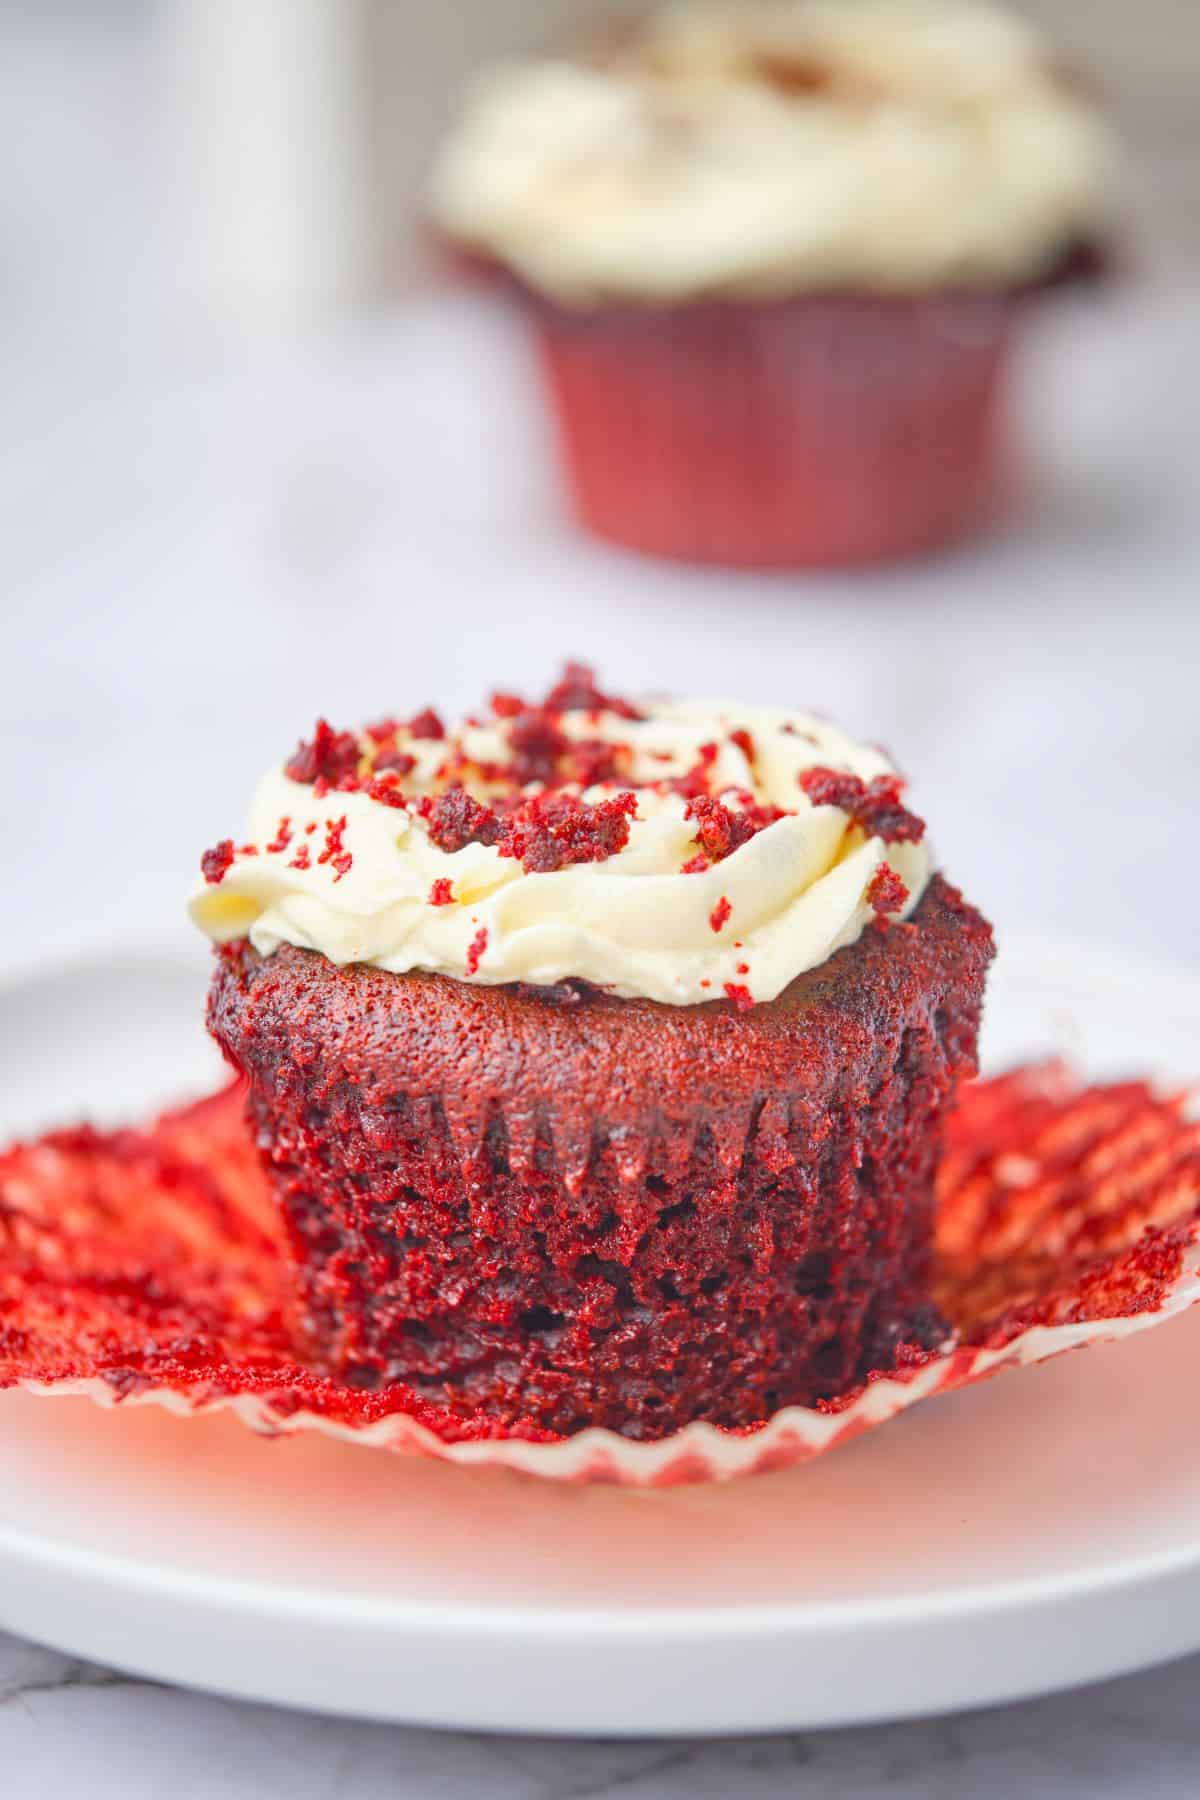 A super moist red velvet cupcake with the wrapper off showing its moist texture.